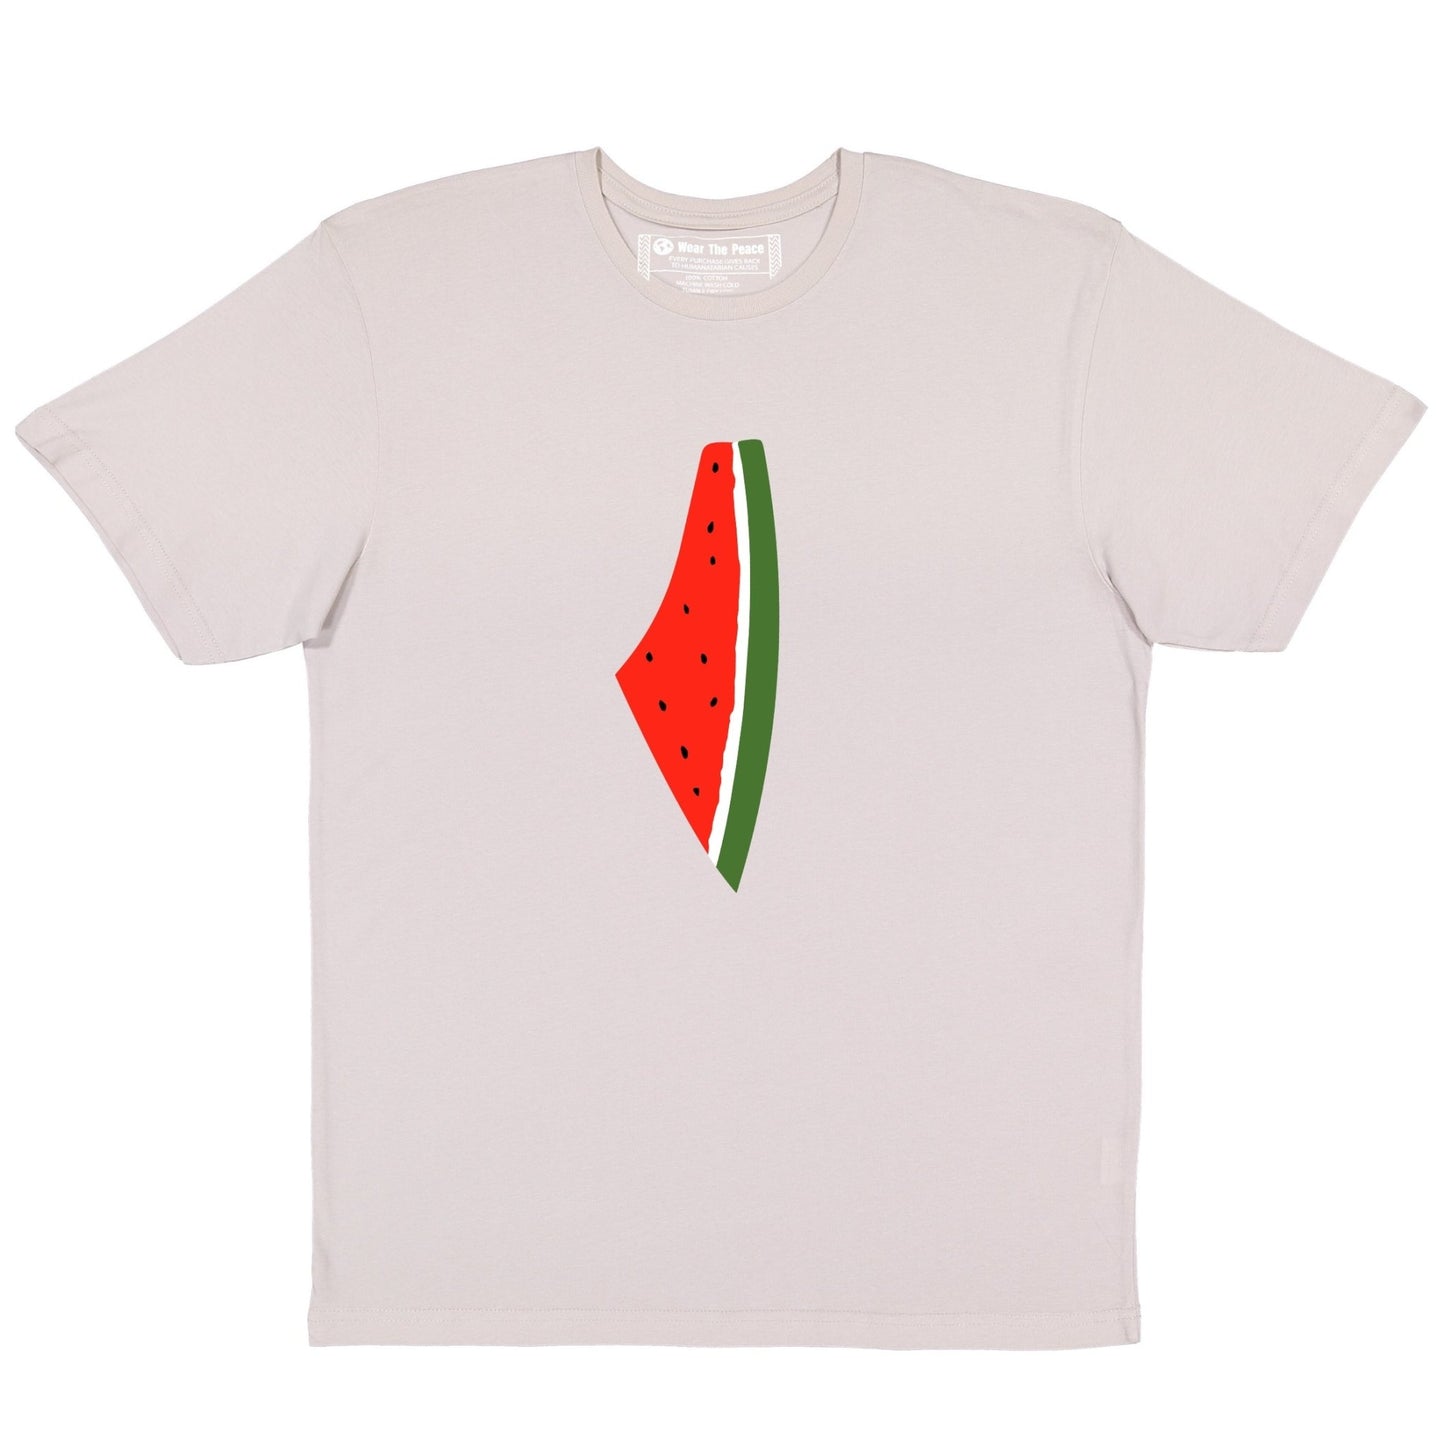 Freedom Melon Tee Wear The Peace Short Sleeves Cloudy S